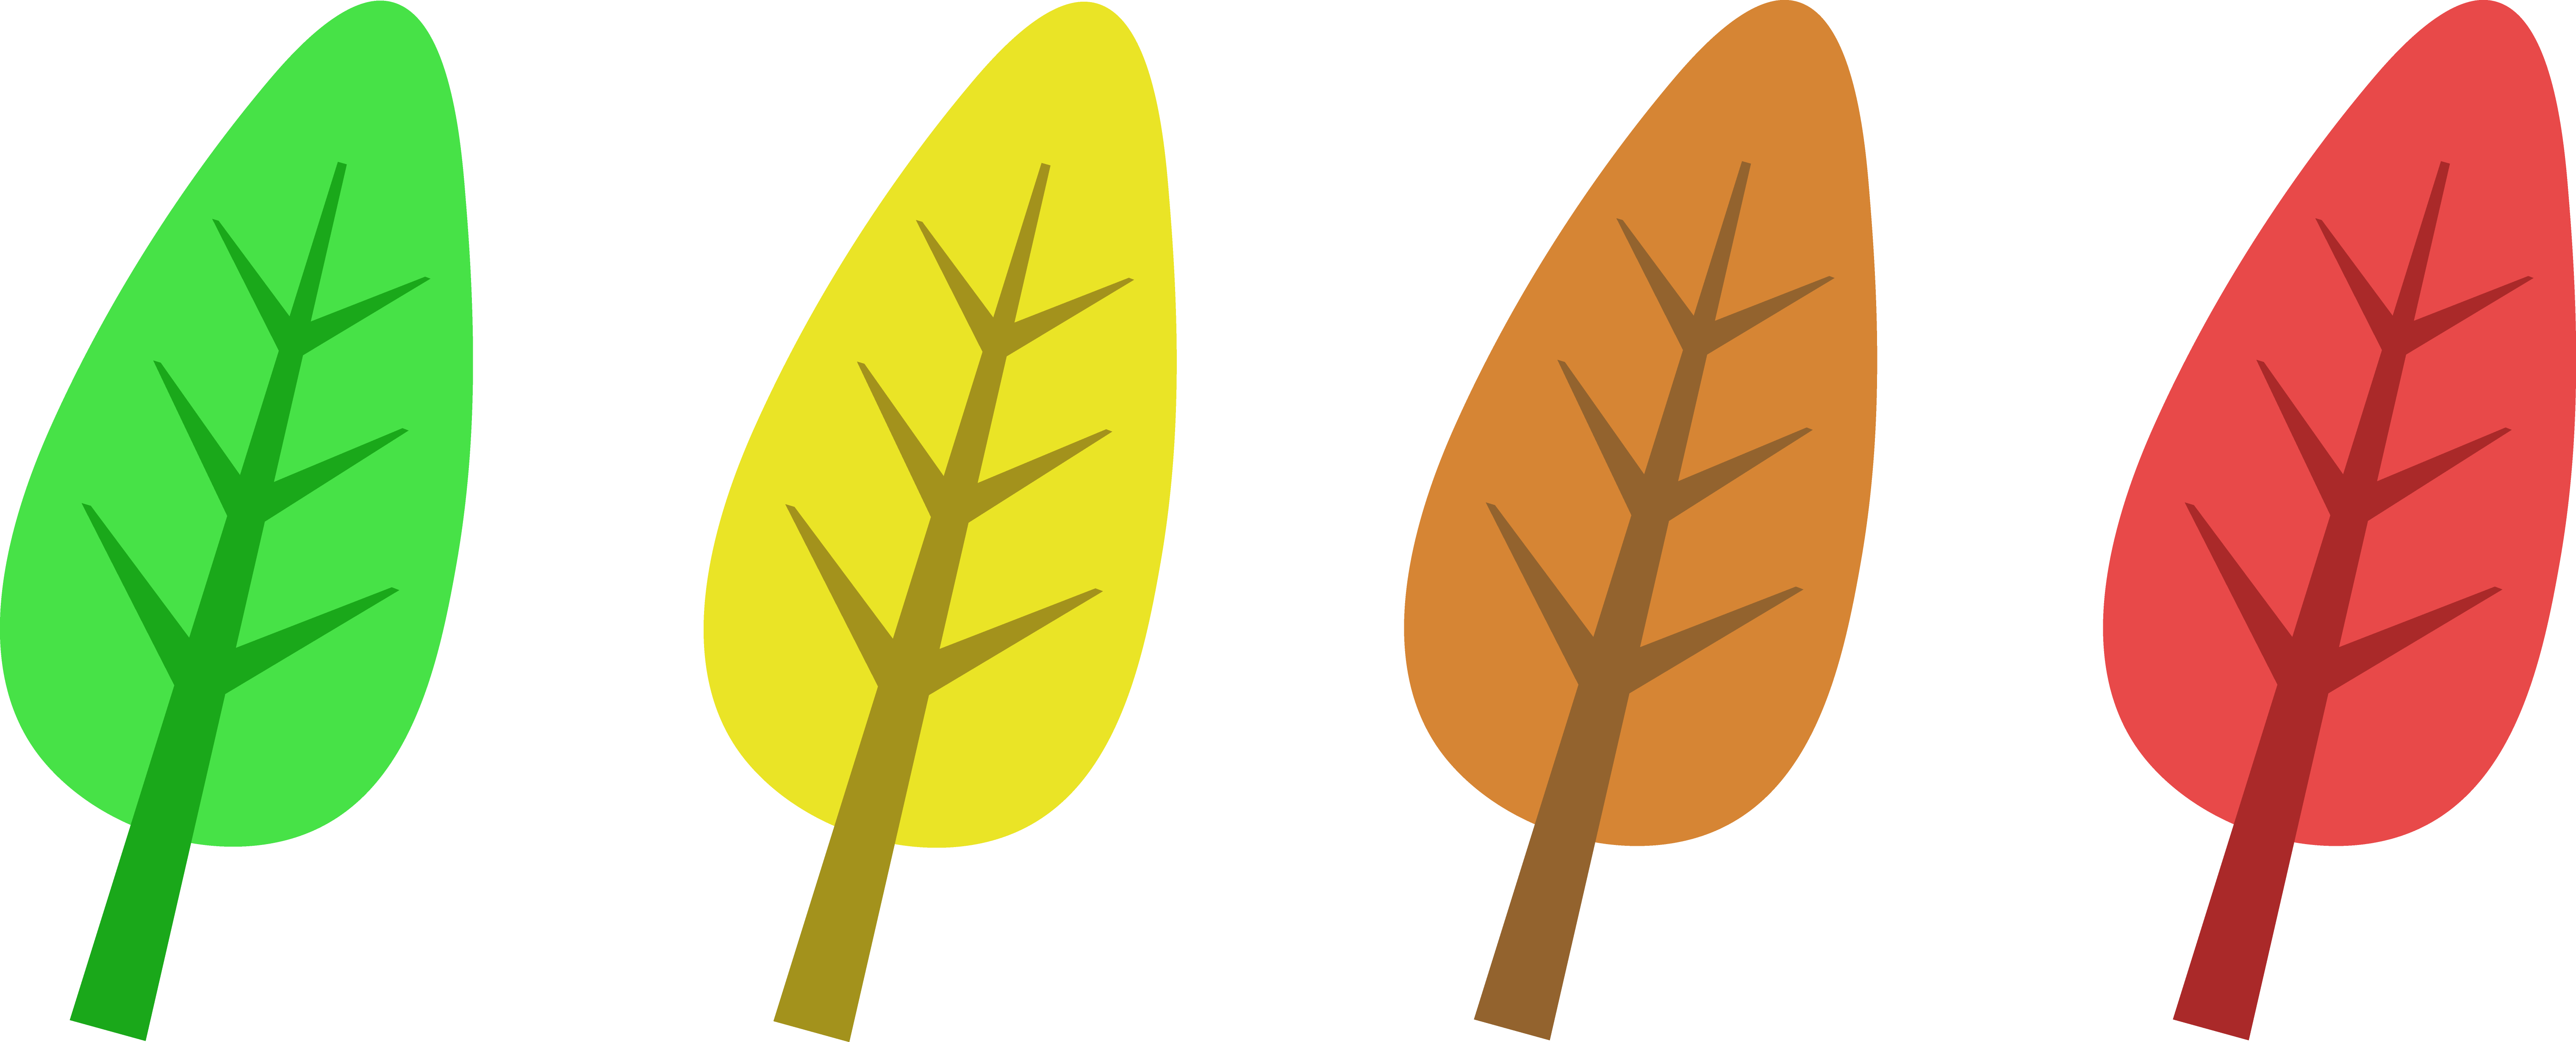 Yellow leaf clipart free clip